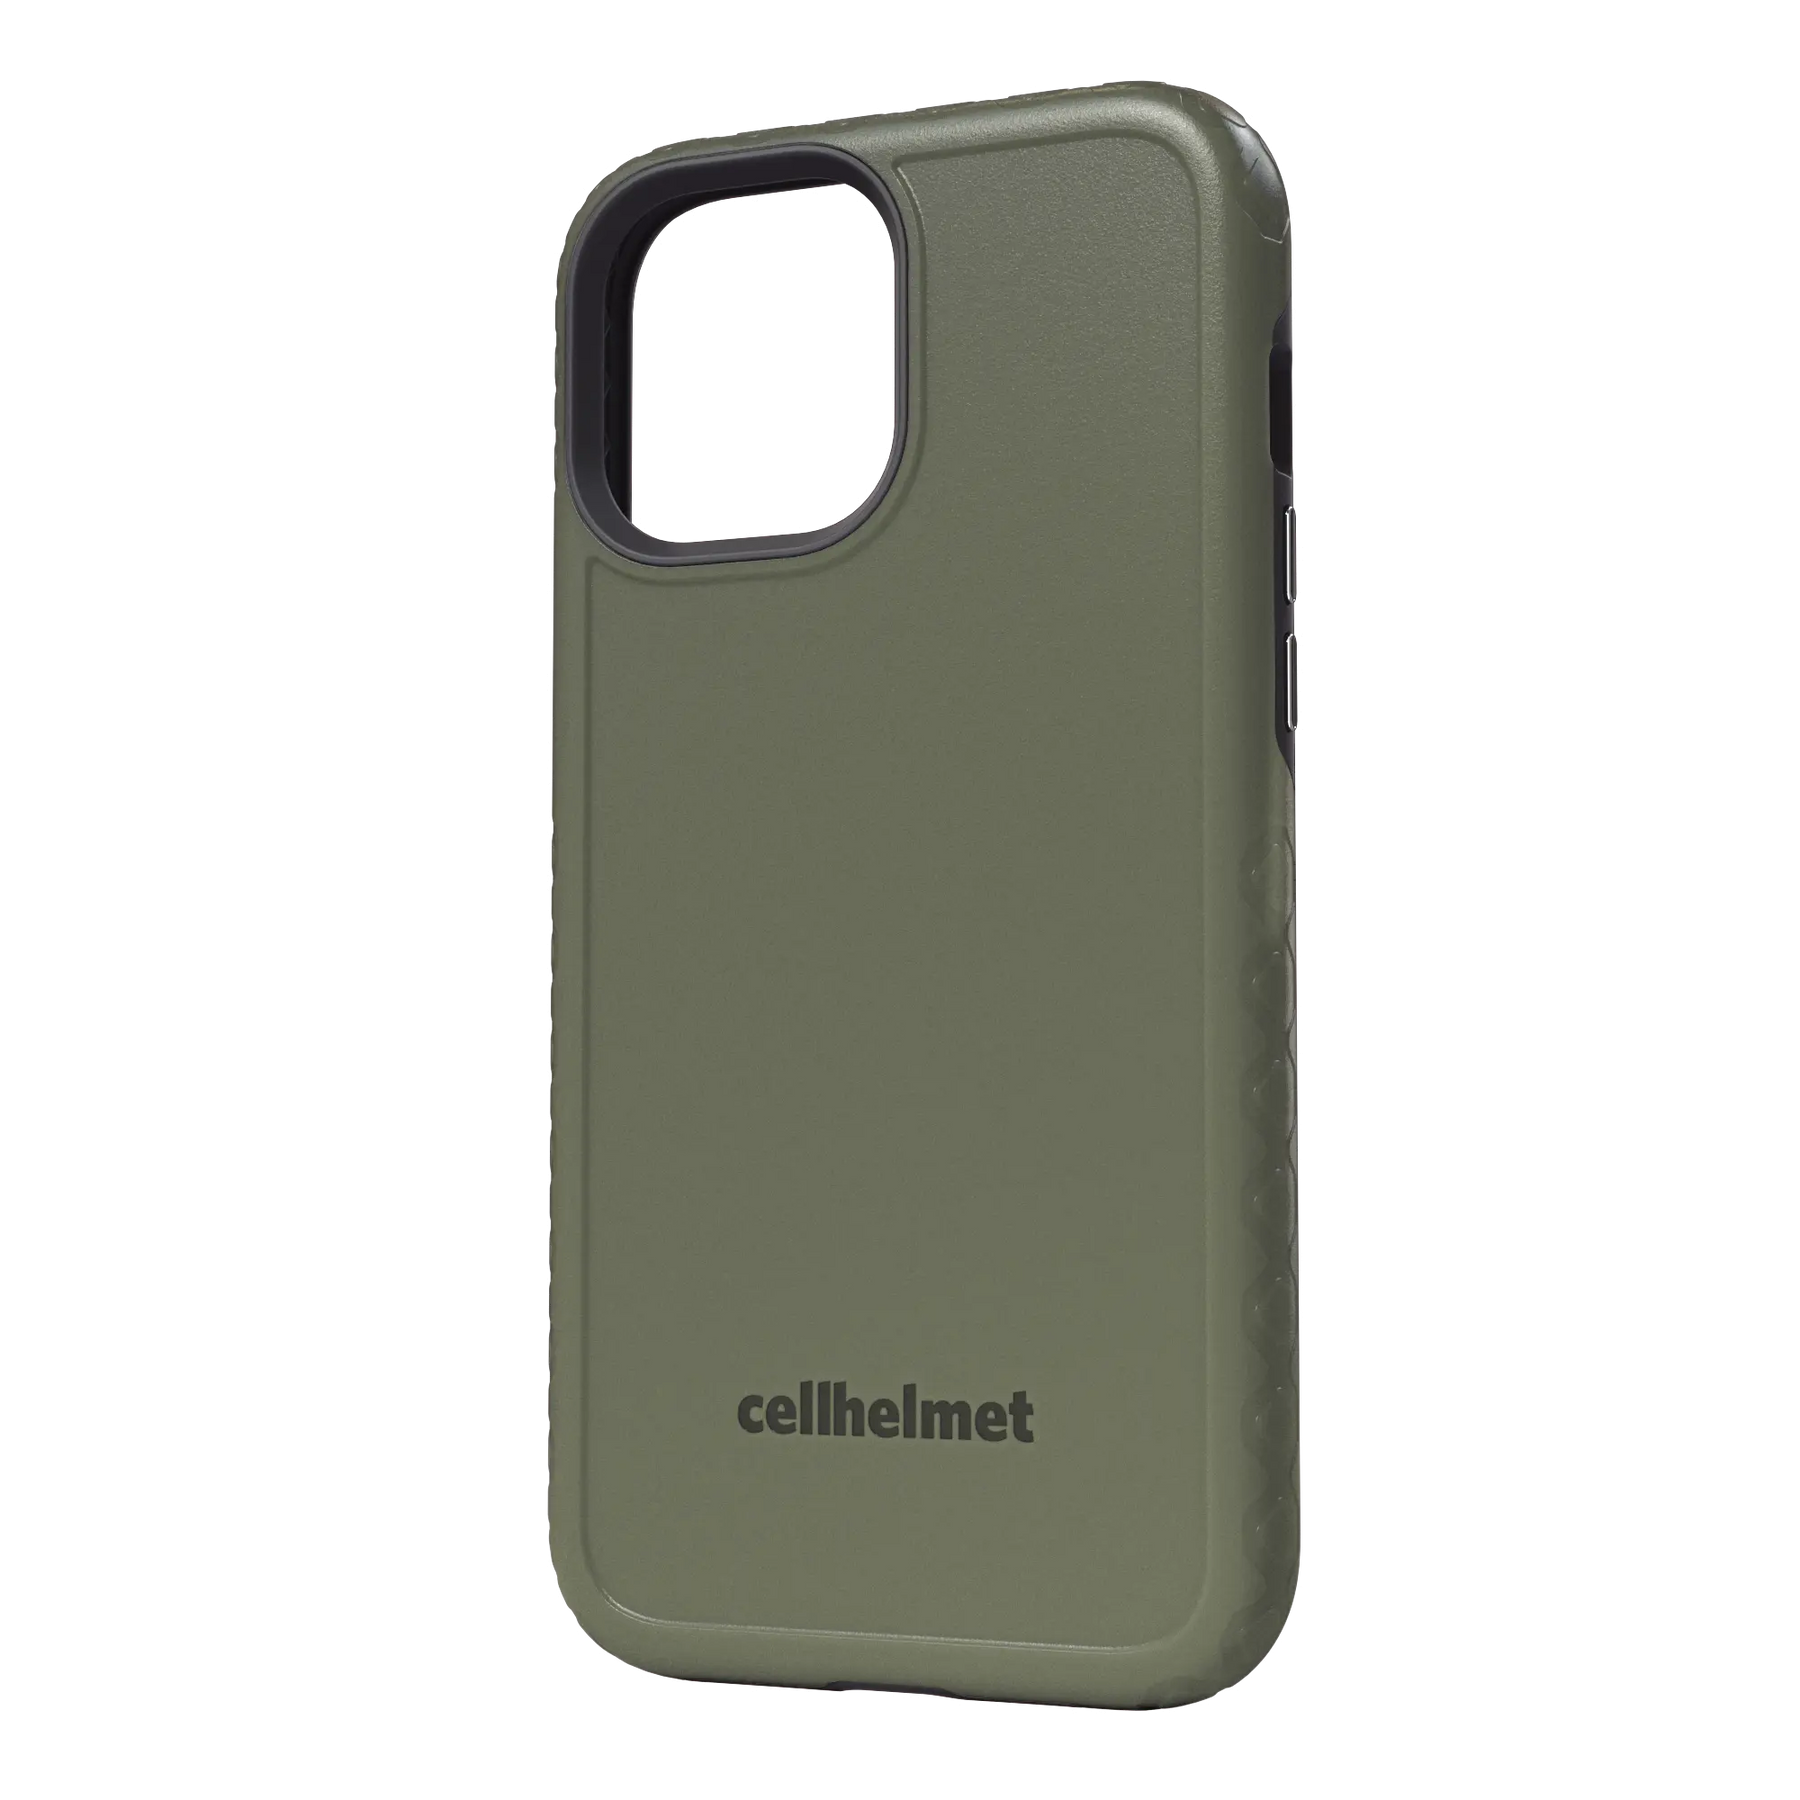 Green cellhelmet Personalized Case for iPhone 12 Pro Max